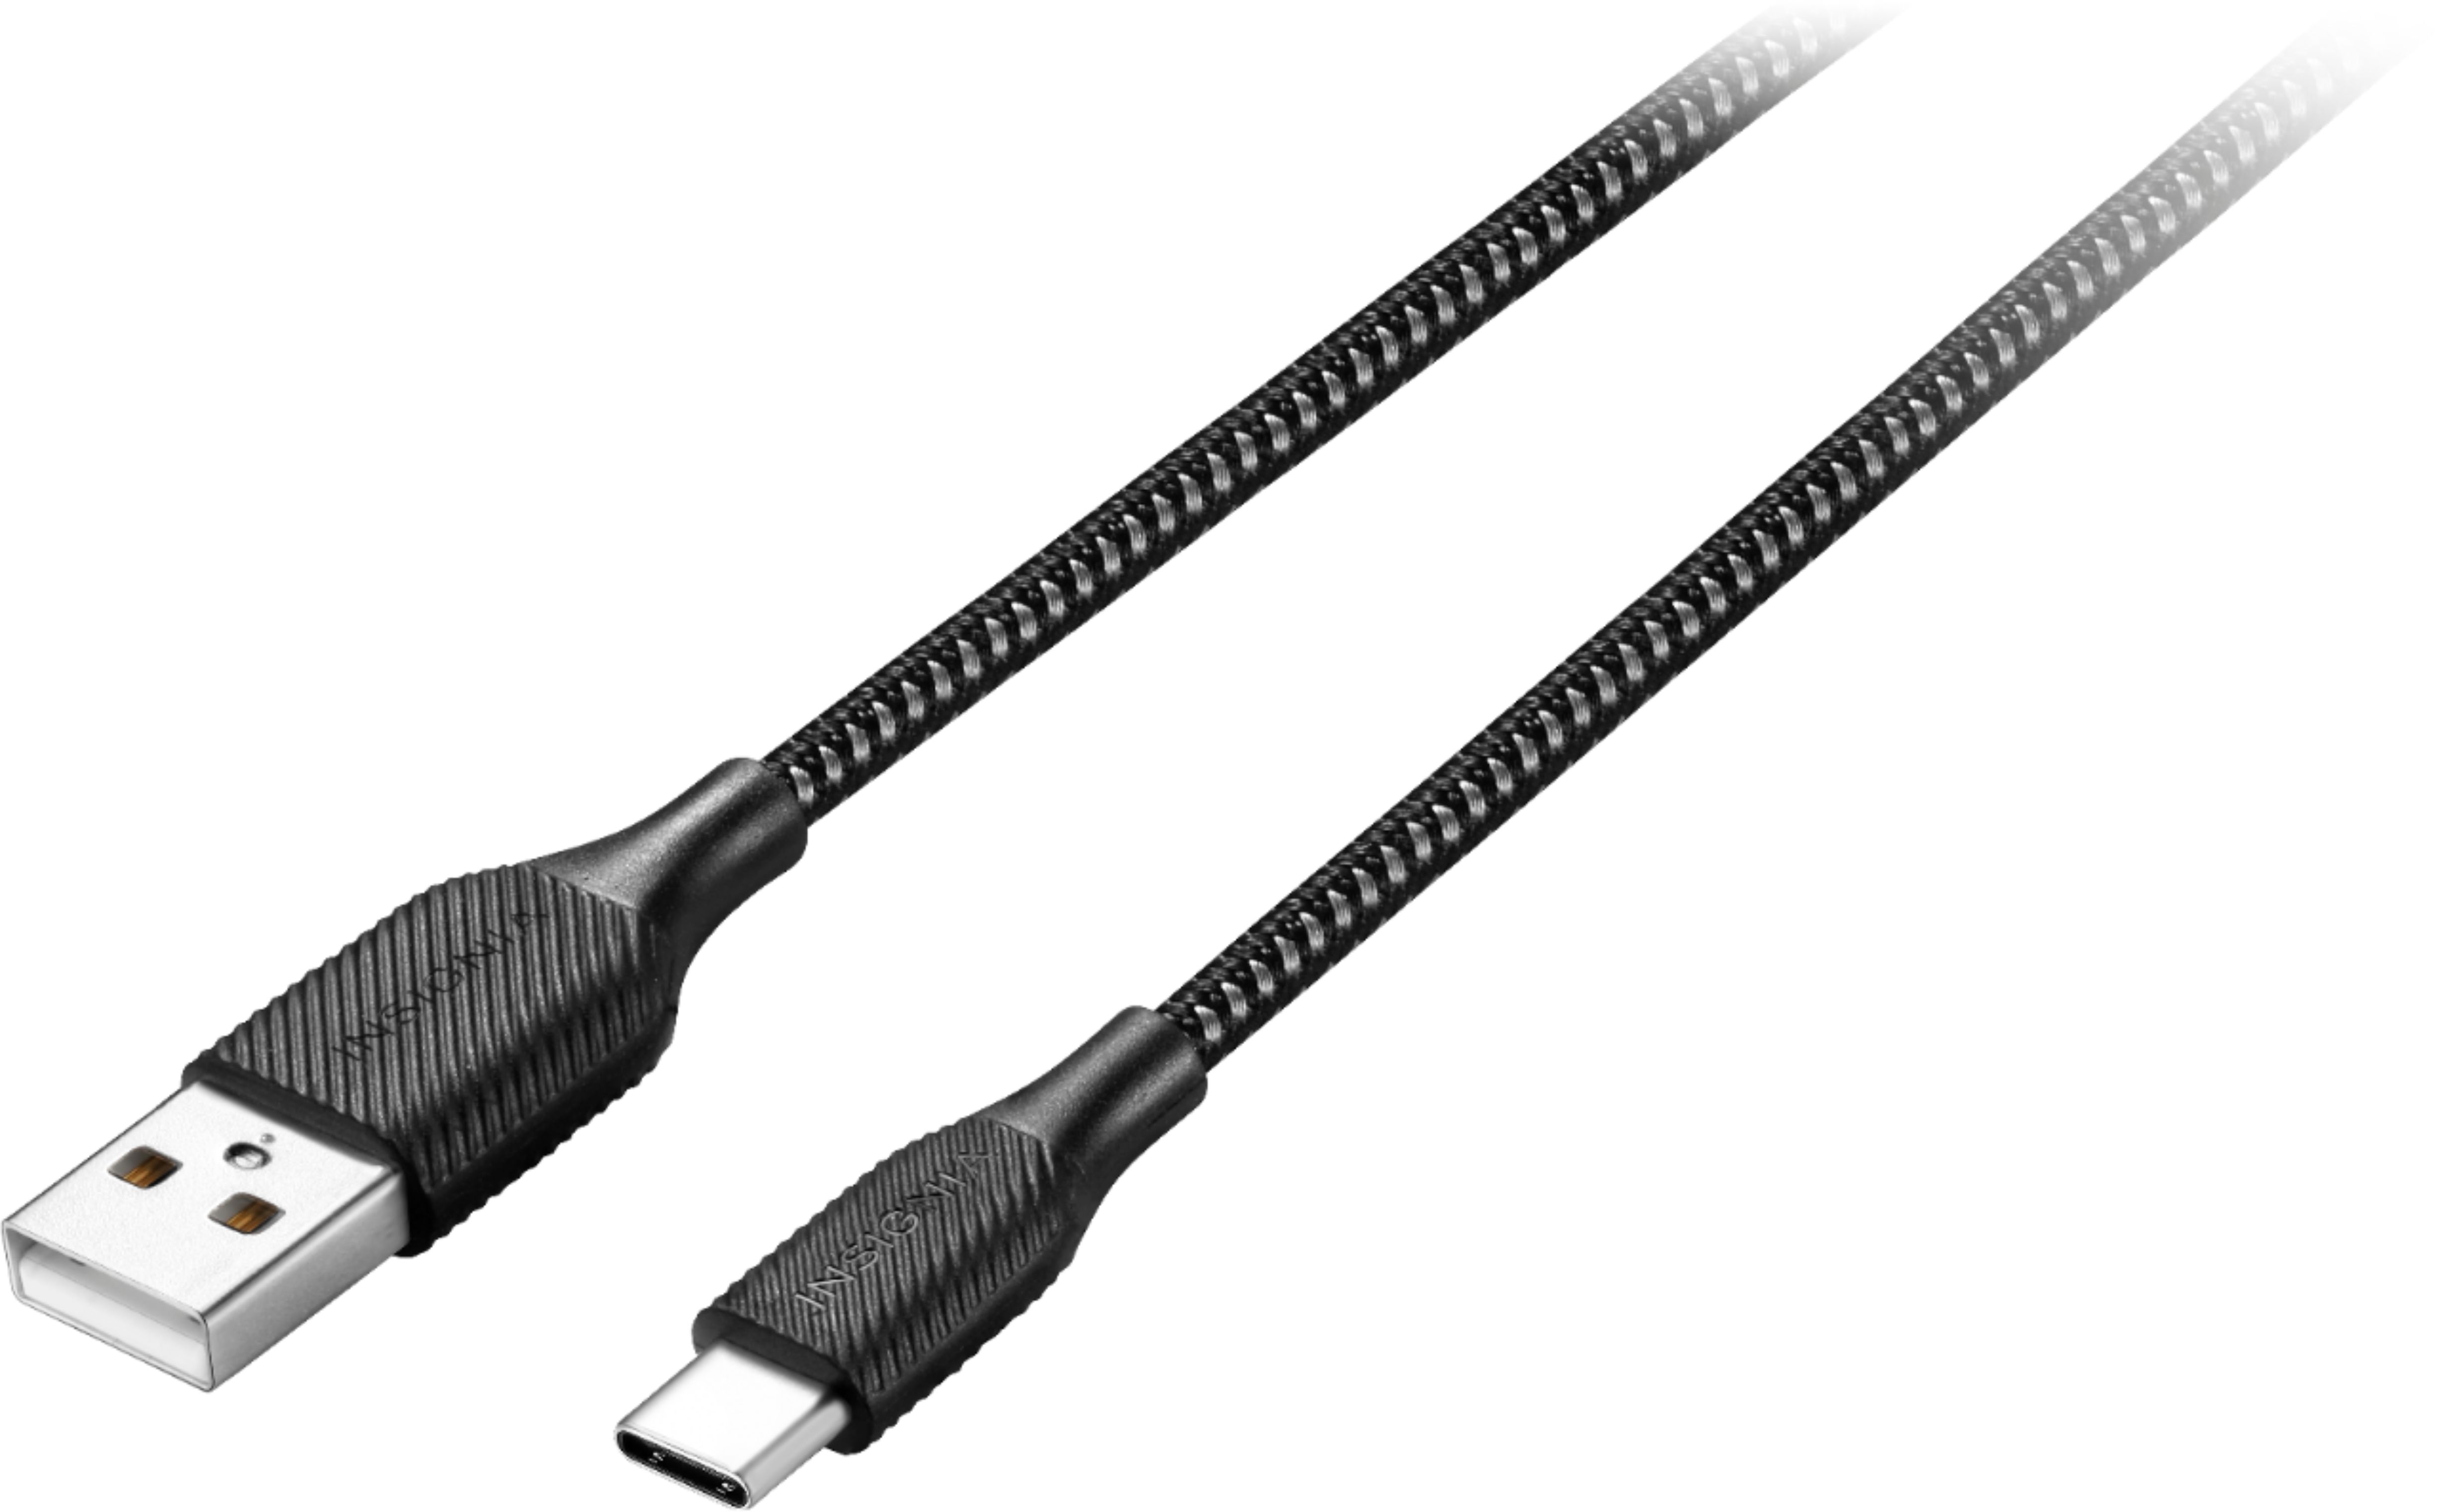 USB-C to USB-A Cable (16'/1.5M)